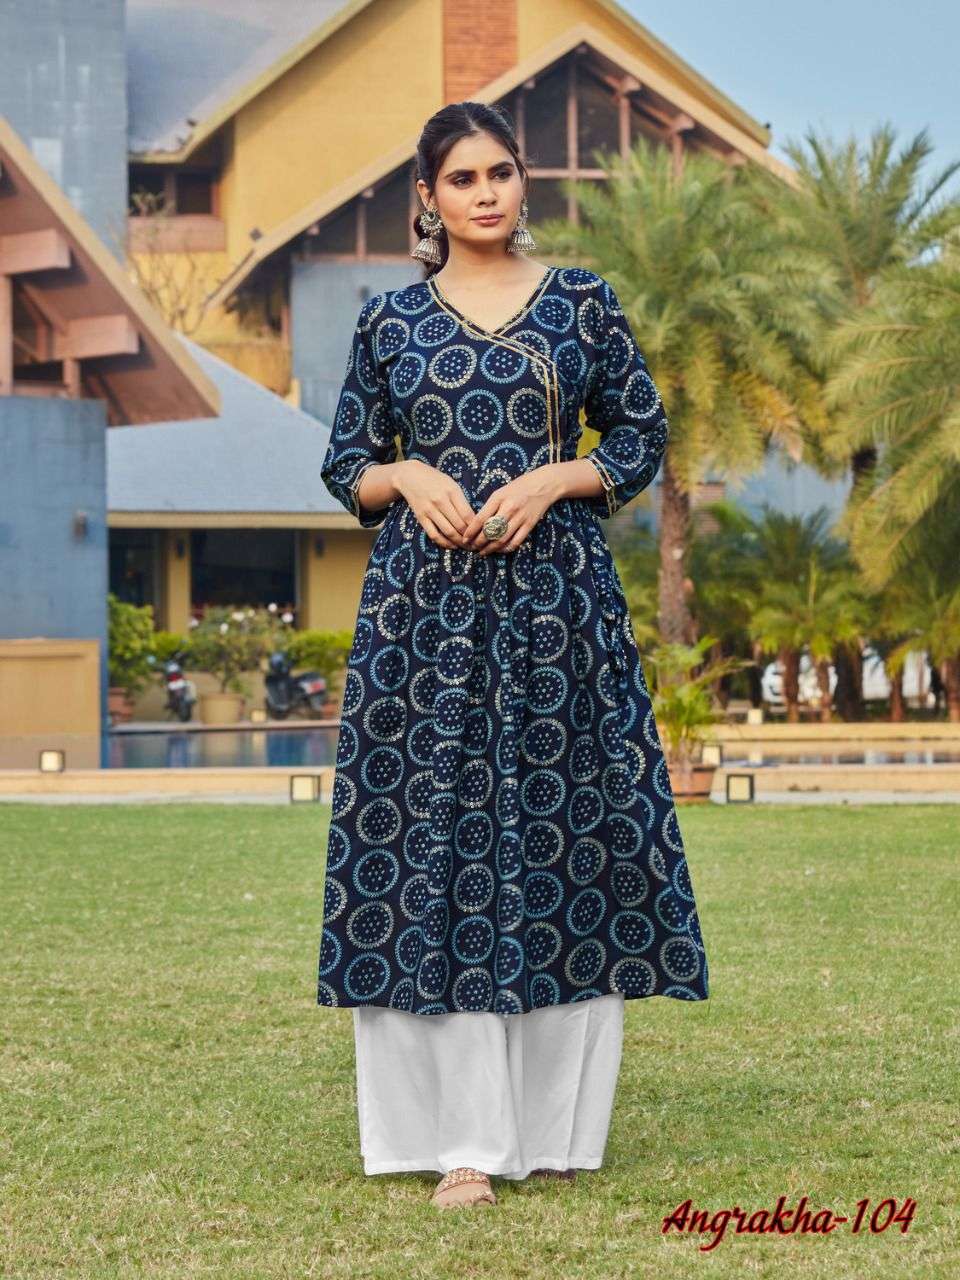 ANGRAKHA BY VEE FAB 101 TO 104 SERIES DESIGNER STYLISH FANCY COLORFUL BEAUTIFUL PARTY WEAR & ETHNIC WEAR COLLECTION RAYON FOIL PRINT KURTIS AT WHOLESALE PRICE